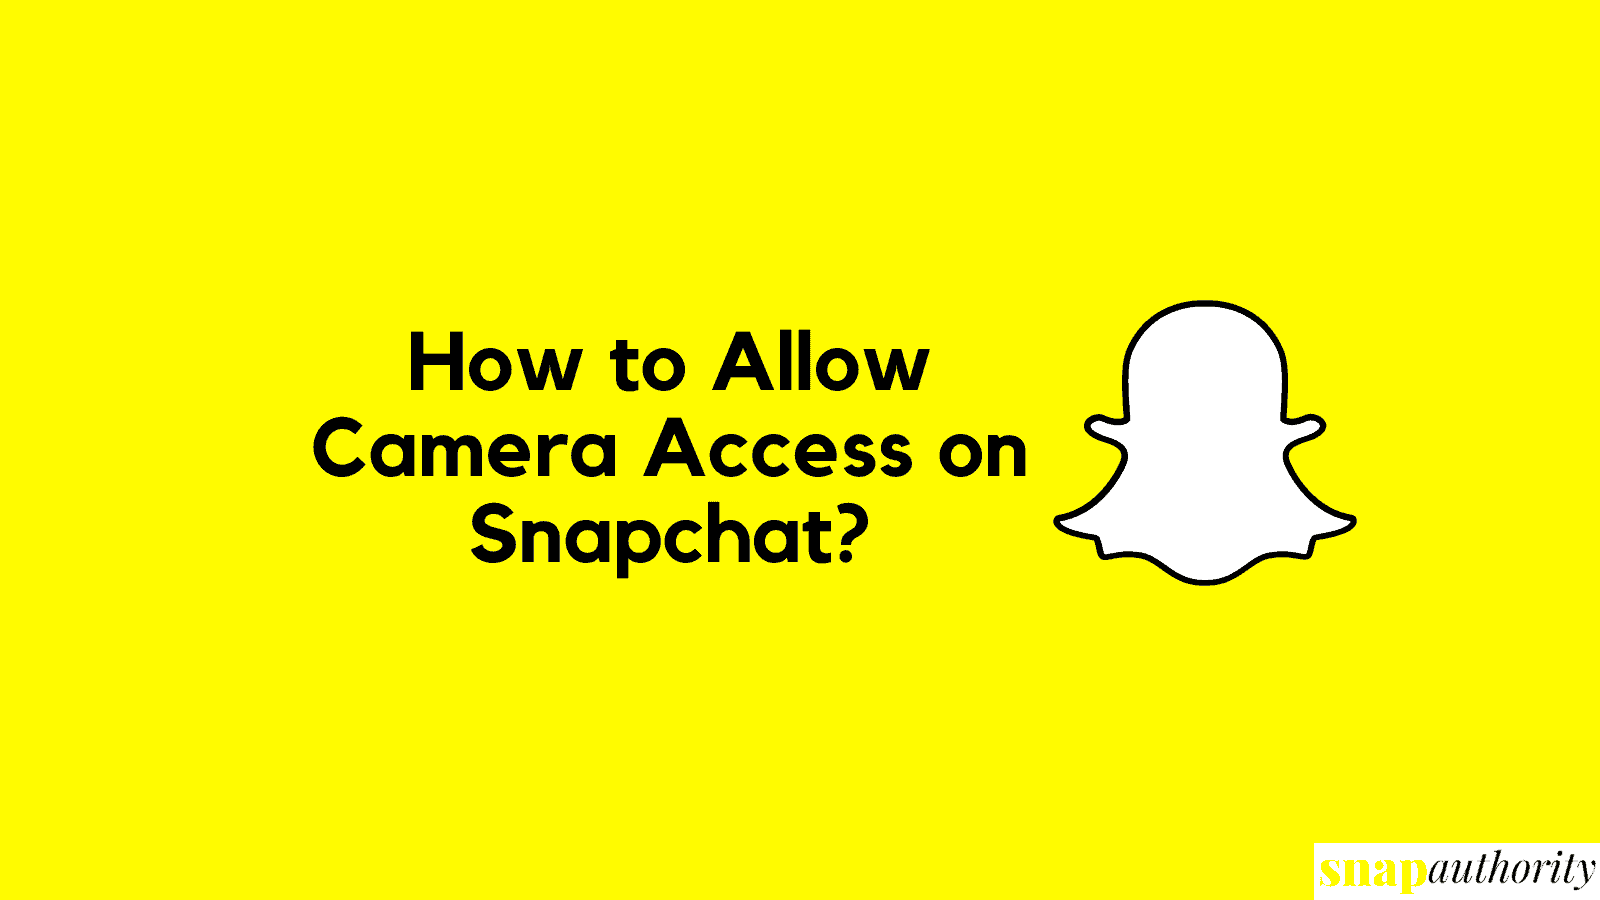 How to enable camera access on Snapchat